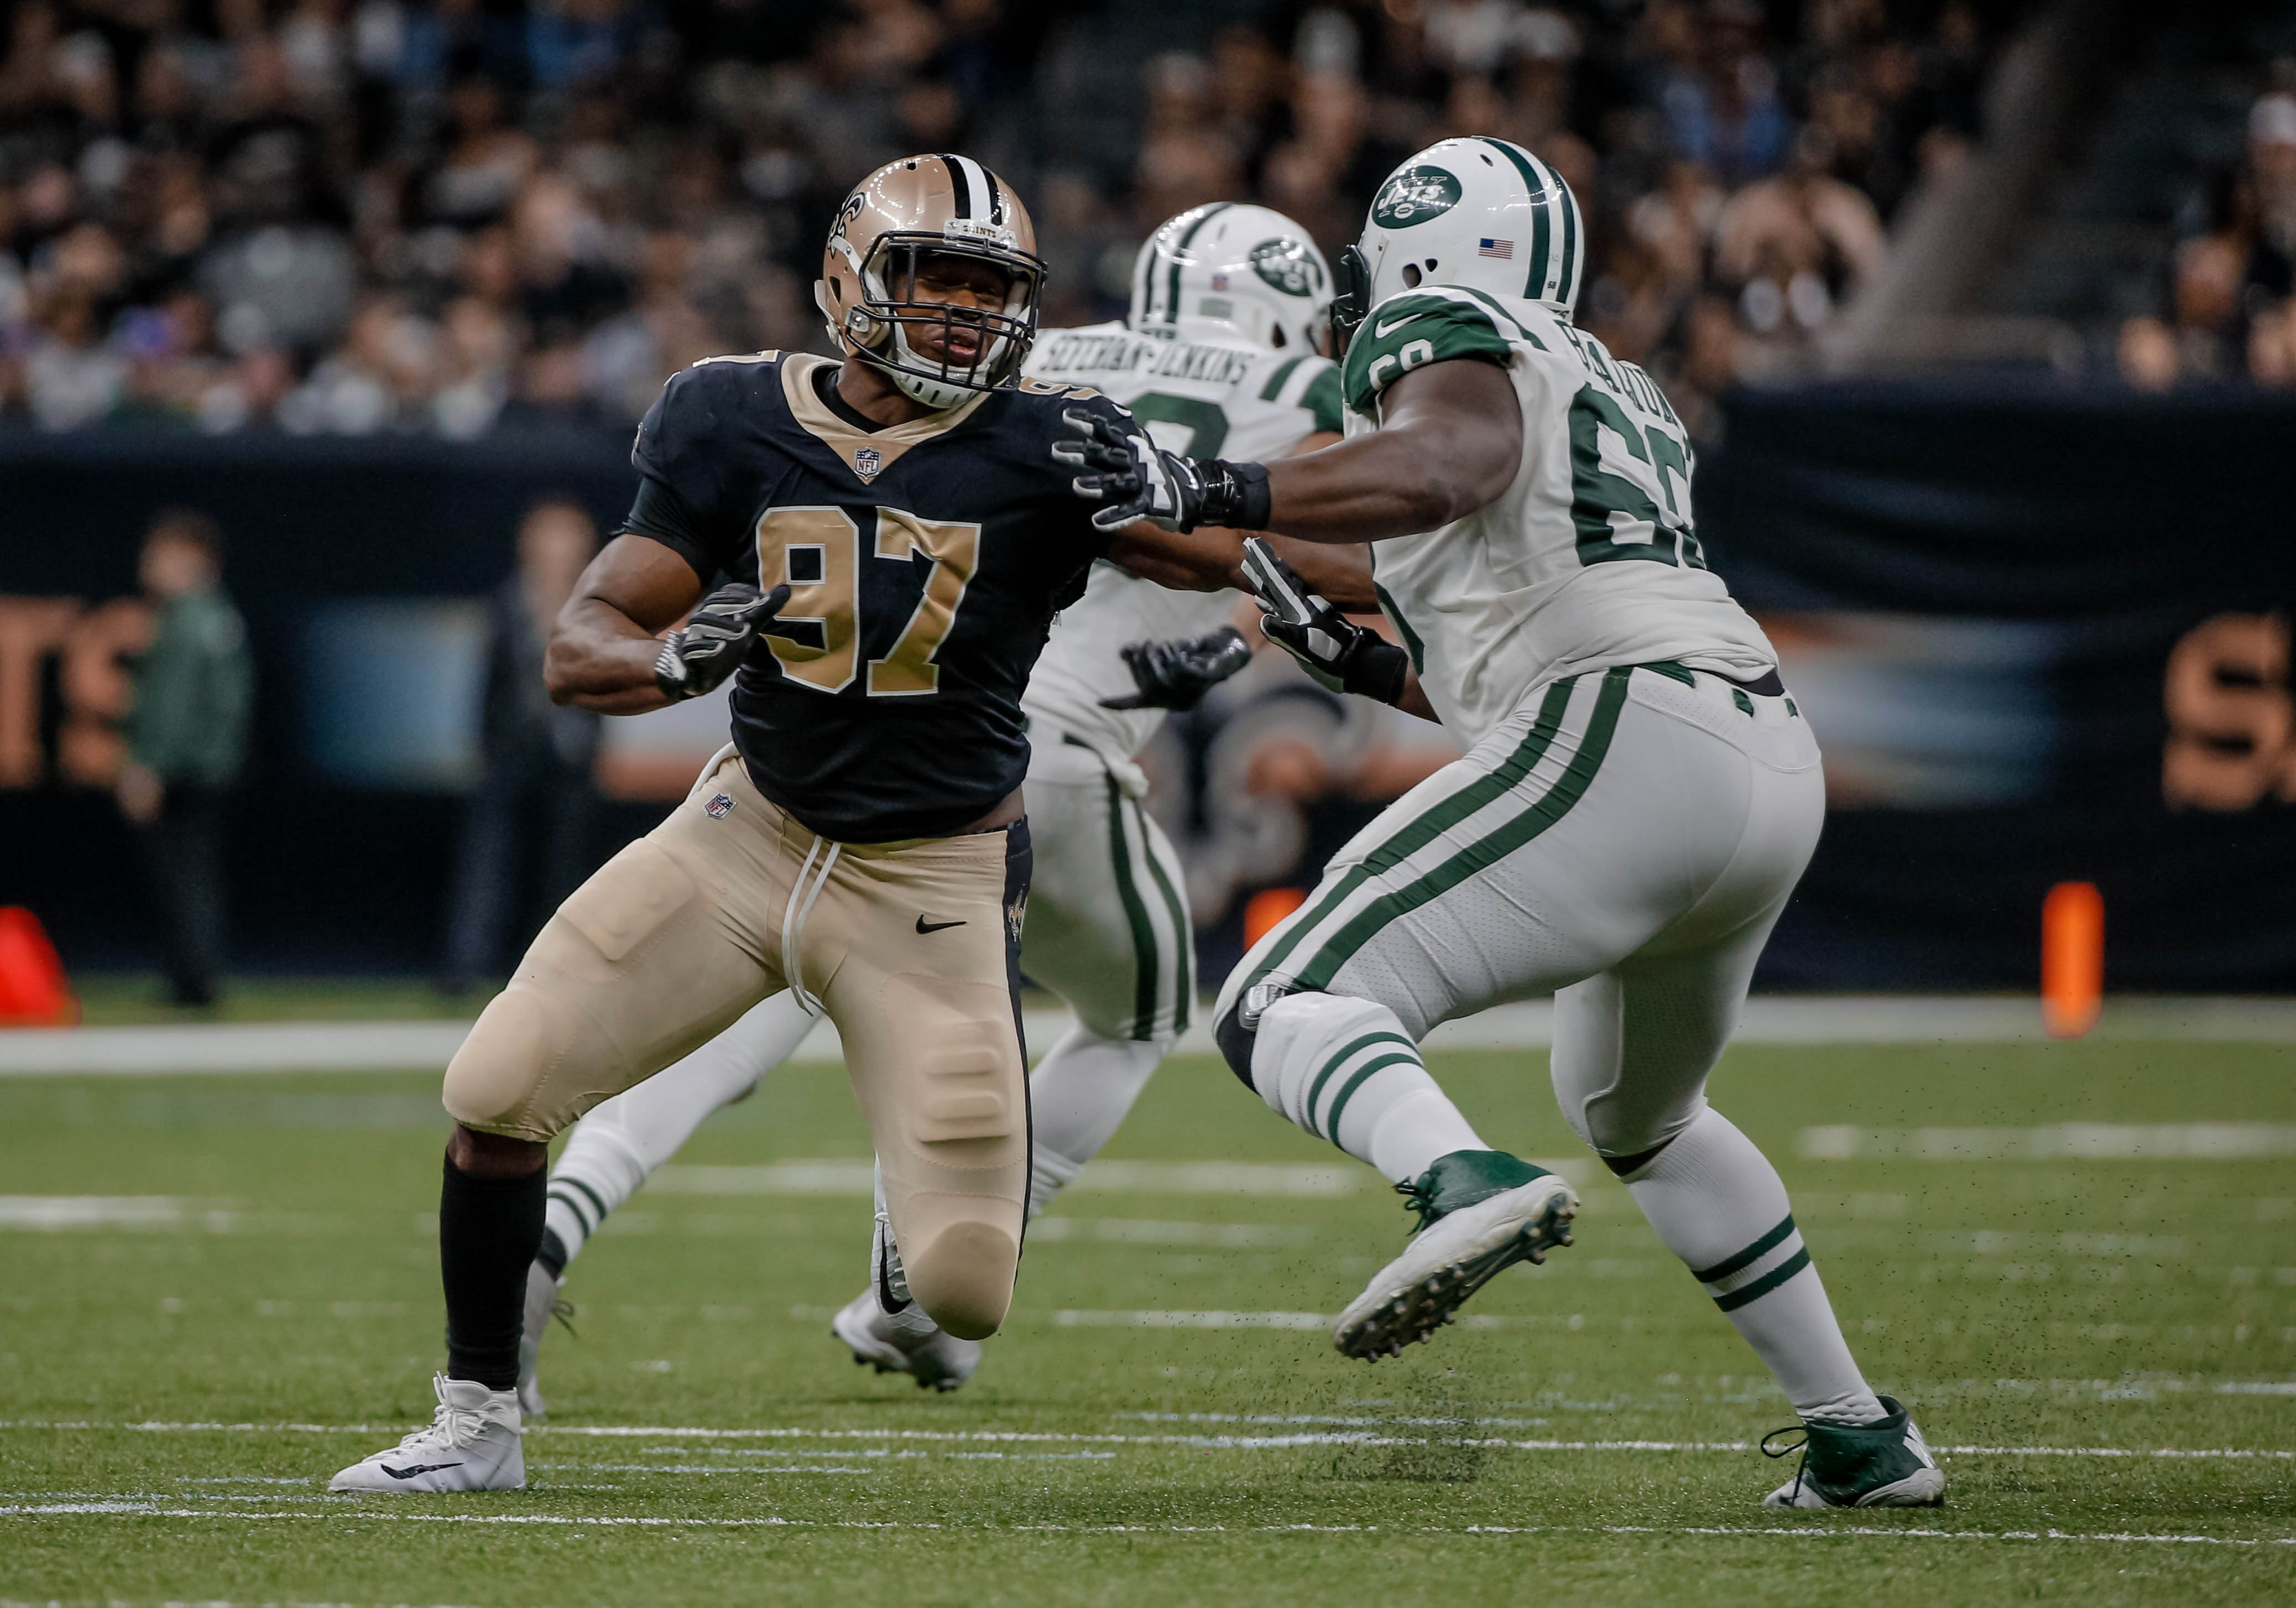 NEW ORLEANS, LA - New Orleans Saints defensive end Al-Quadin Muhammad (97) rushes against  New York Jets offensive tackle Kelvin Beachum (68) during the second  half at the Mercedes-Benz Superdome.